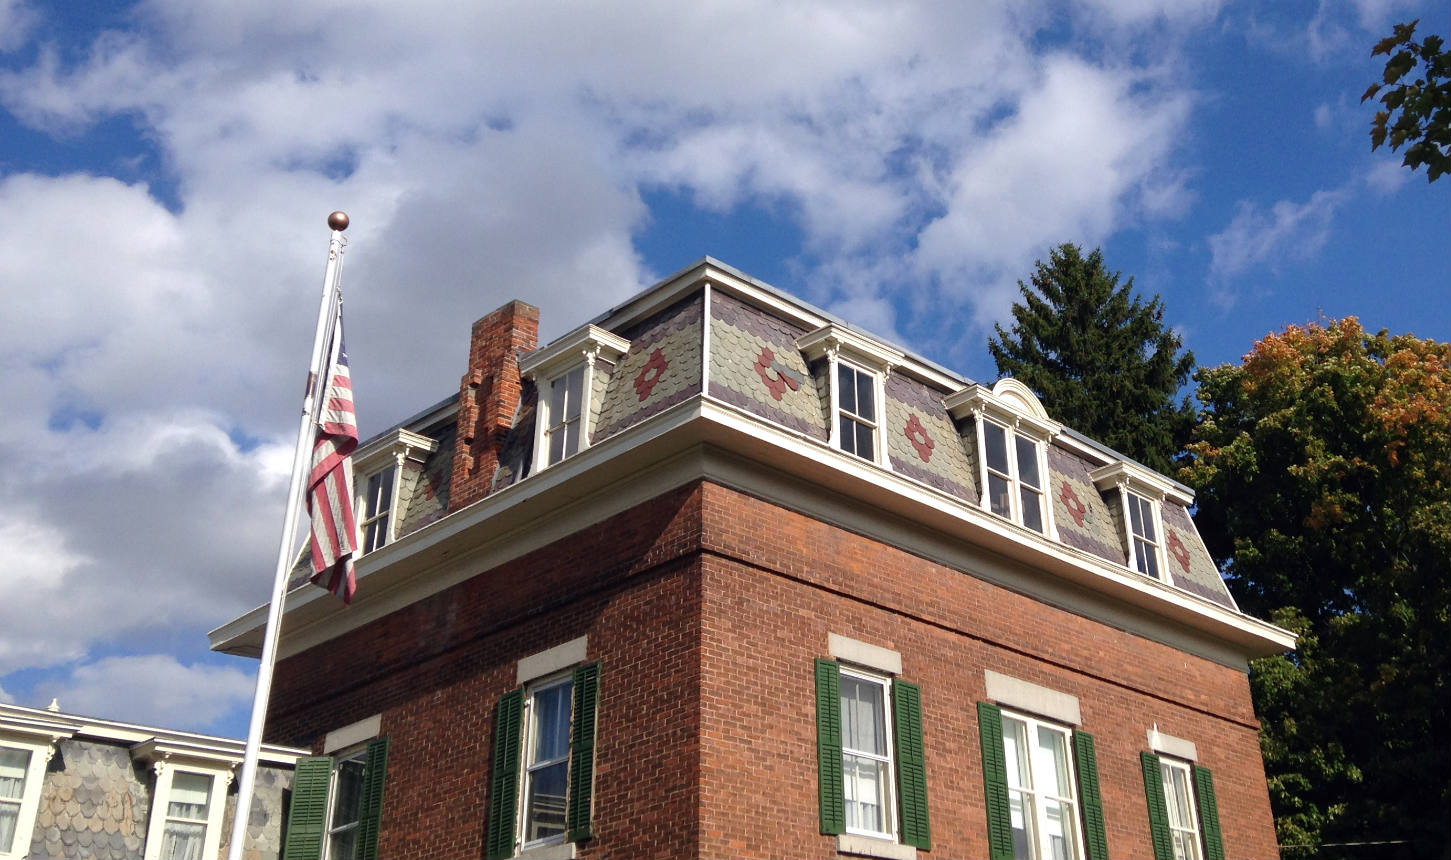 Mansard Roof and Decorative Chimney at Howe House Museum